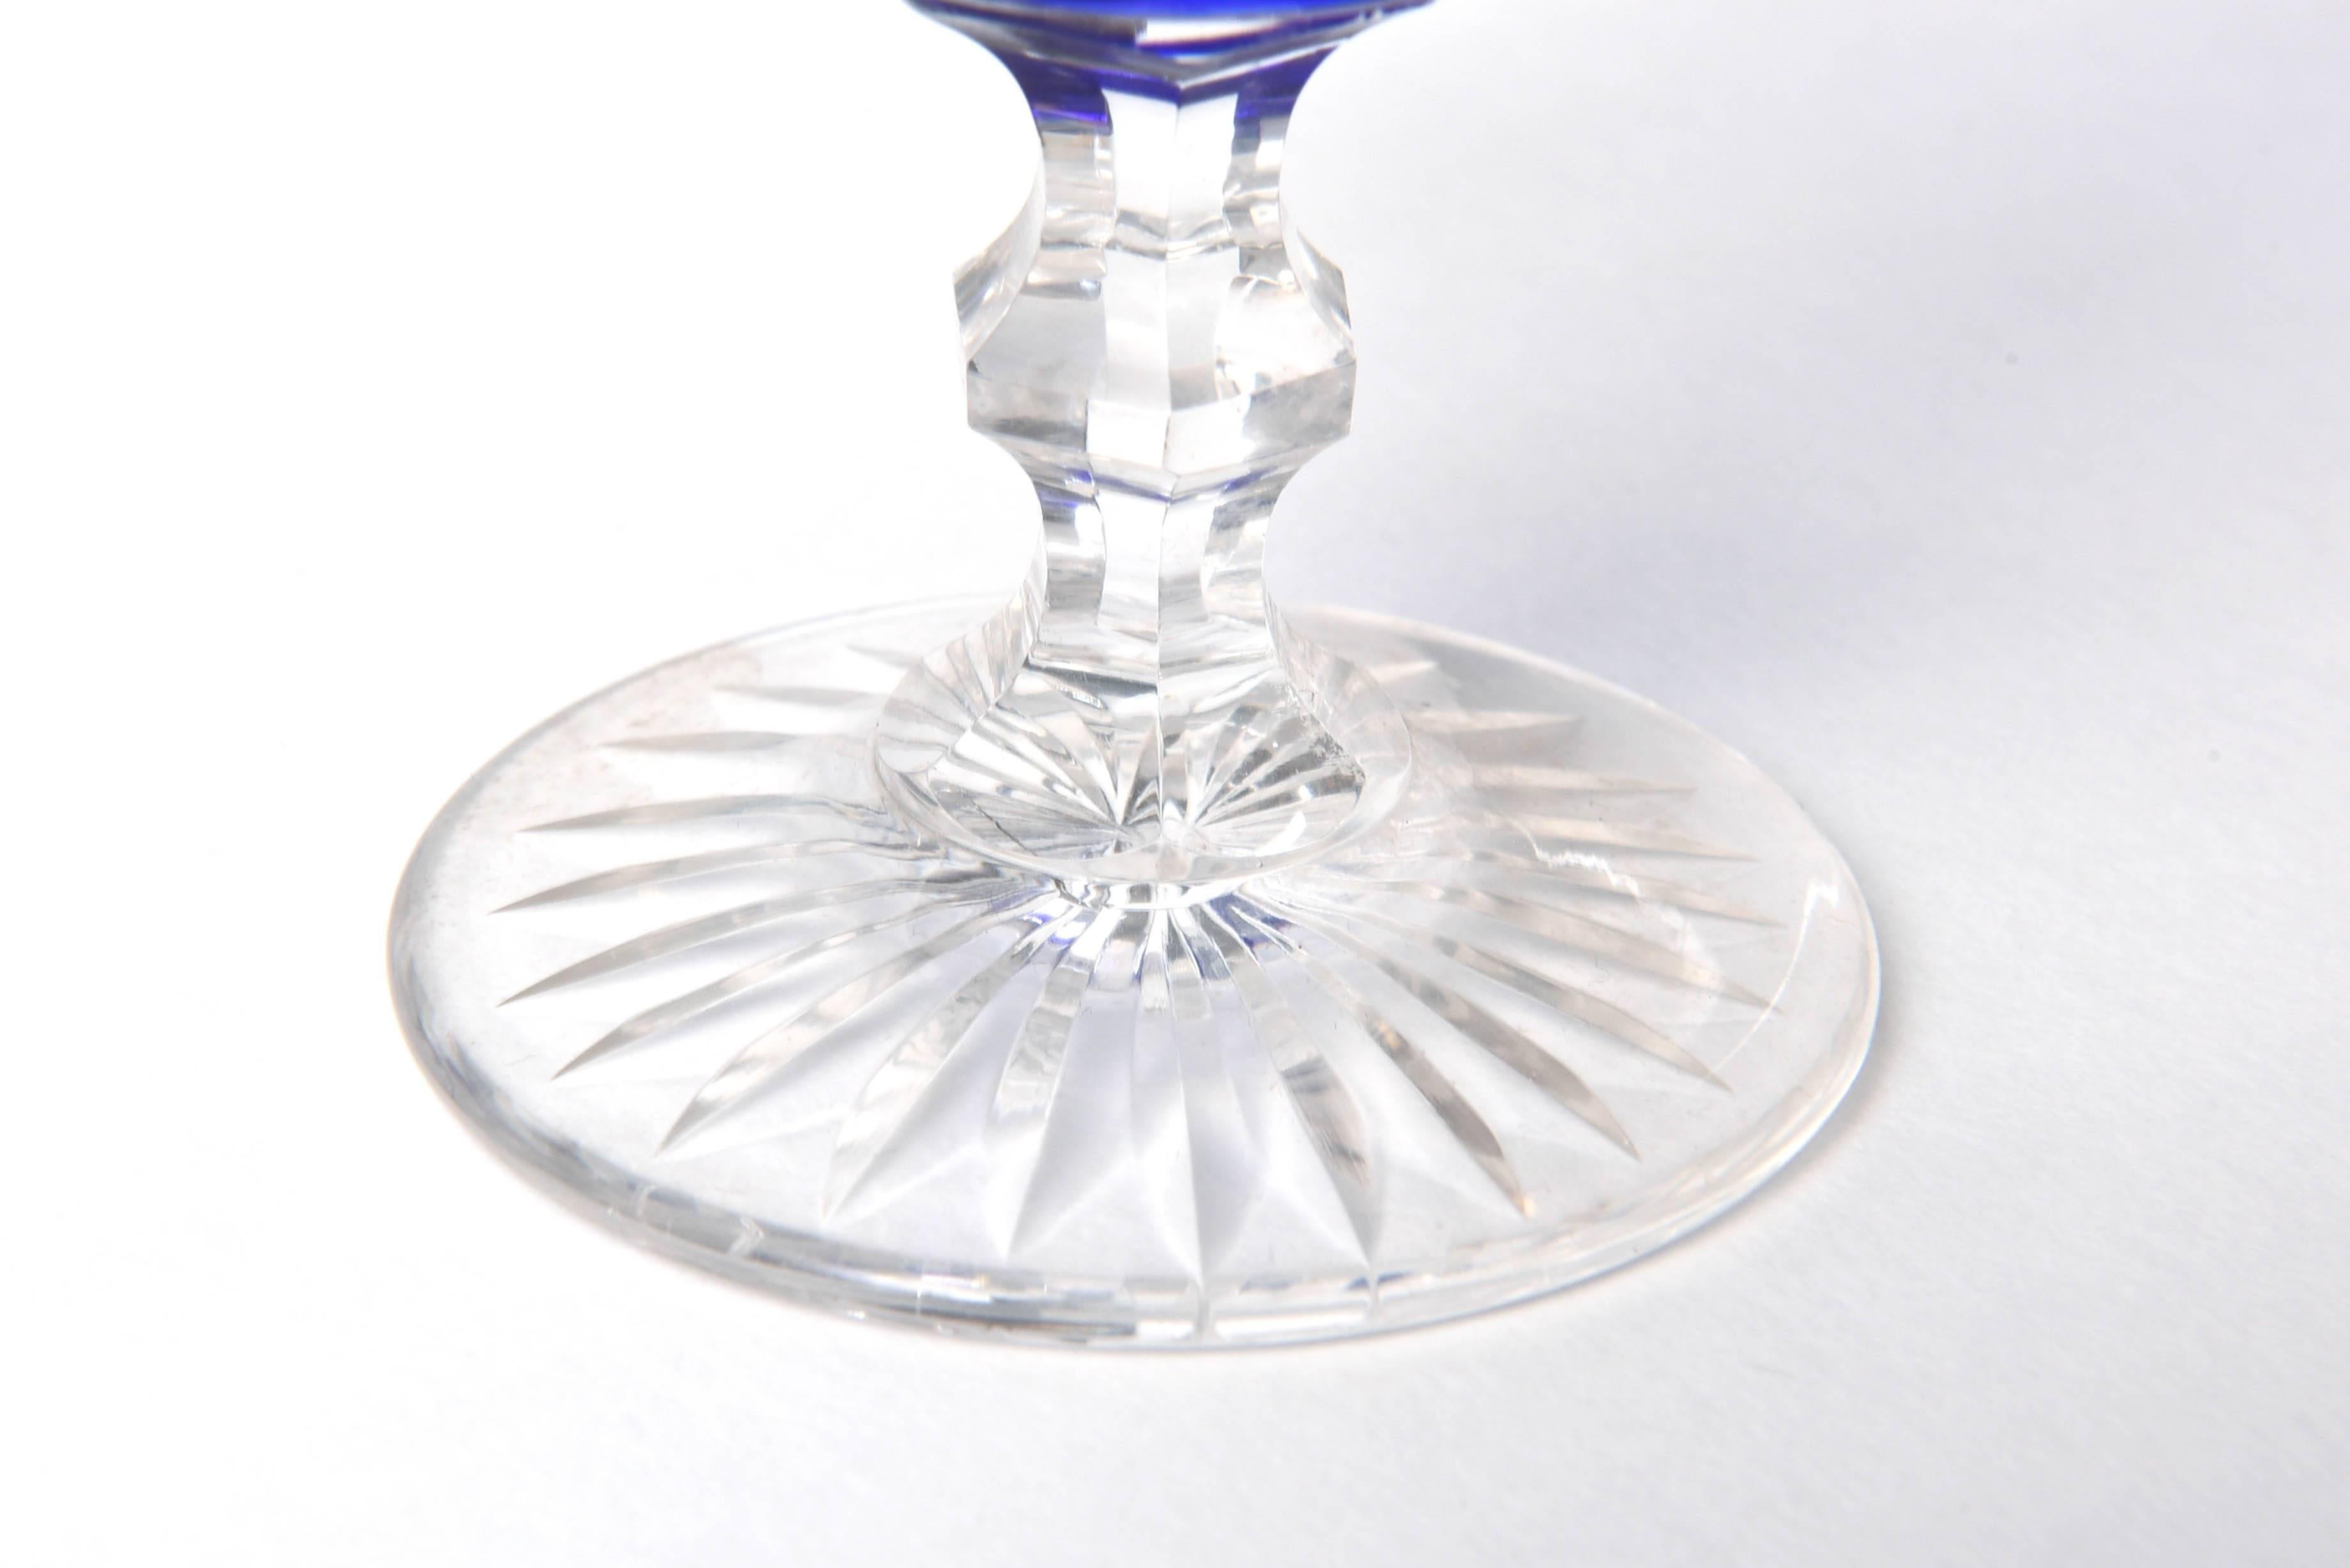 Hand-Crafted 12 Cobalt Blue and Clear Cut Wine Glasses, Antique